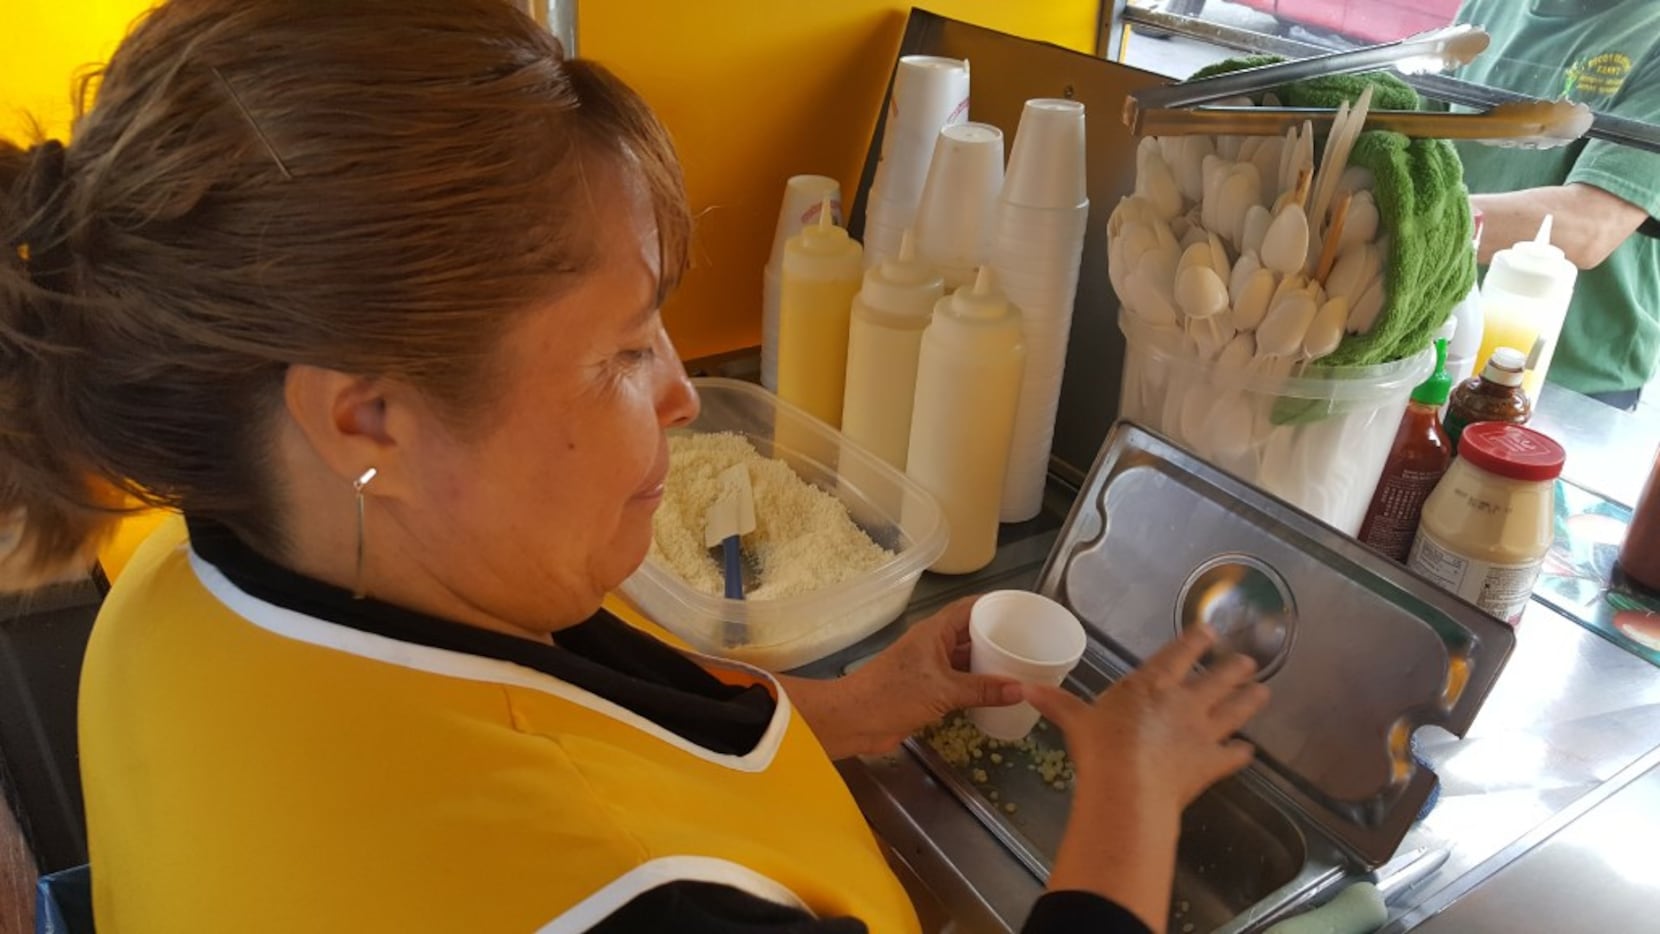 Susana Soto prepares the corn for an elote at Elotes Fanny on Harry Hines Boulevard in Dallas.